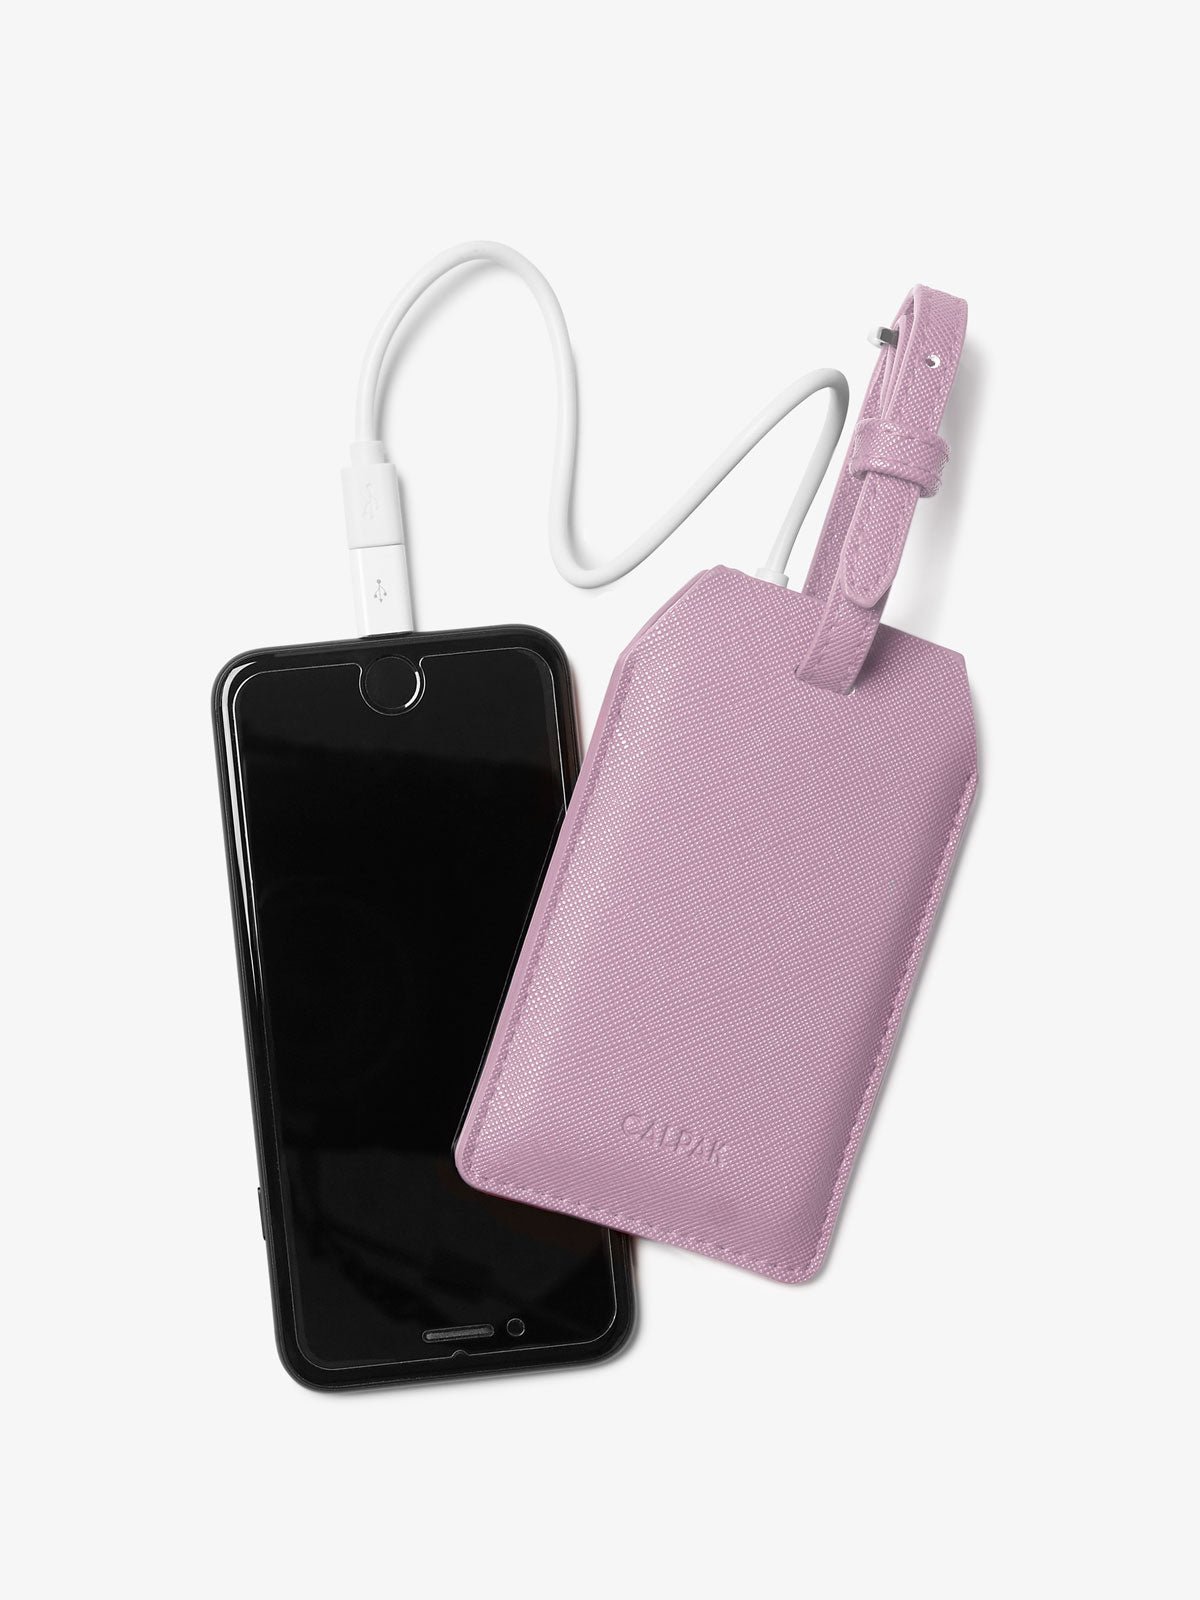 phone charger luggage tag